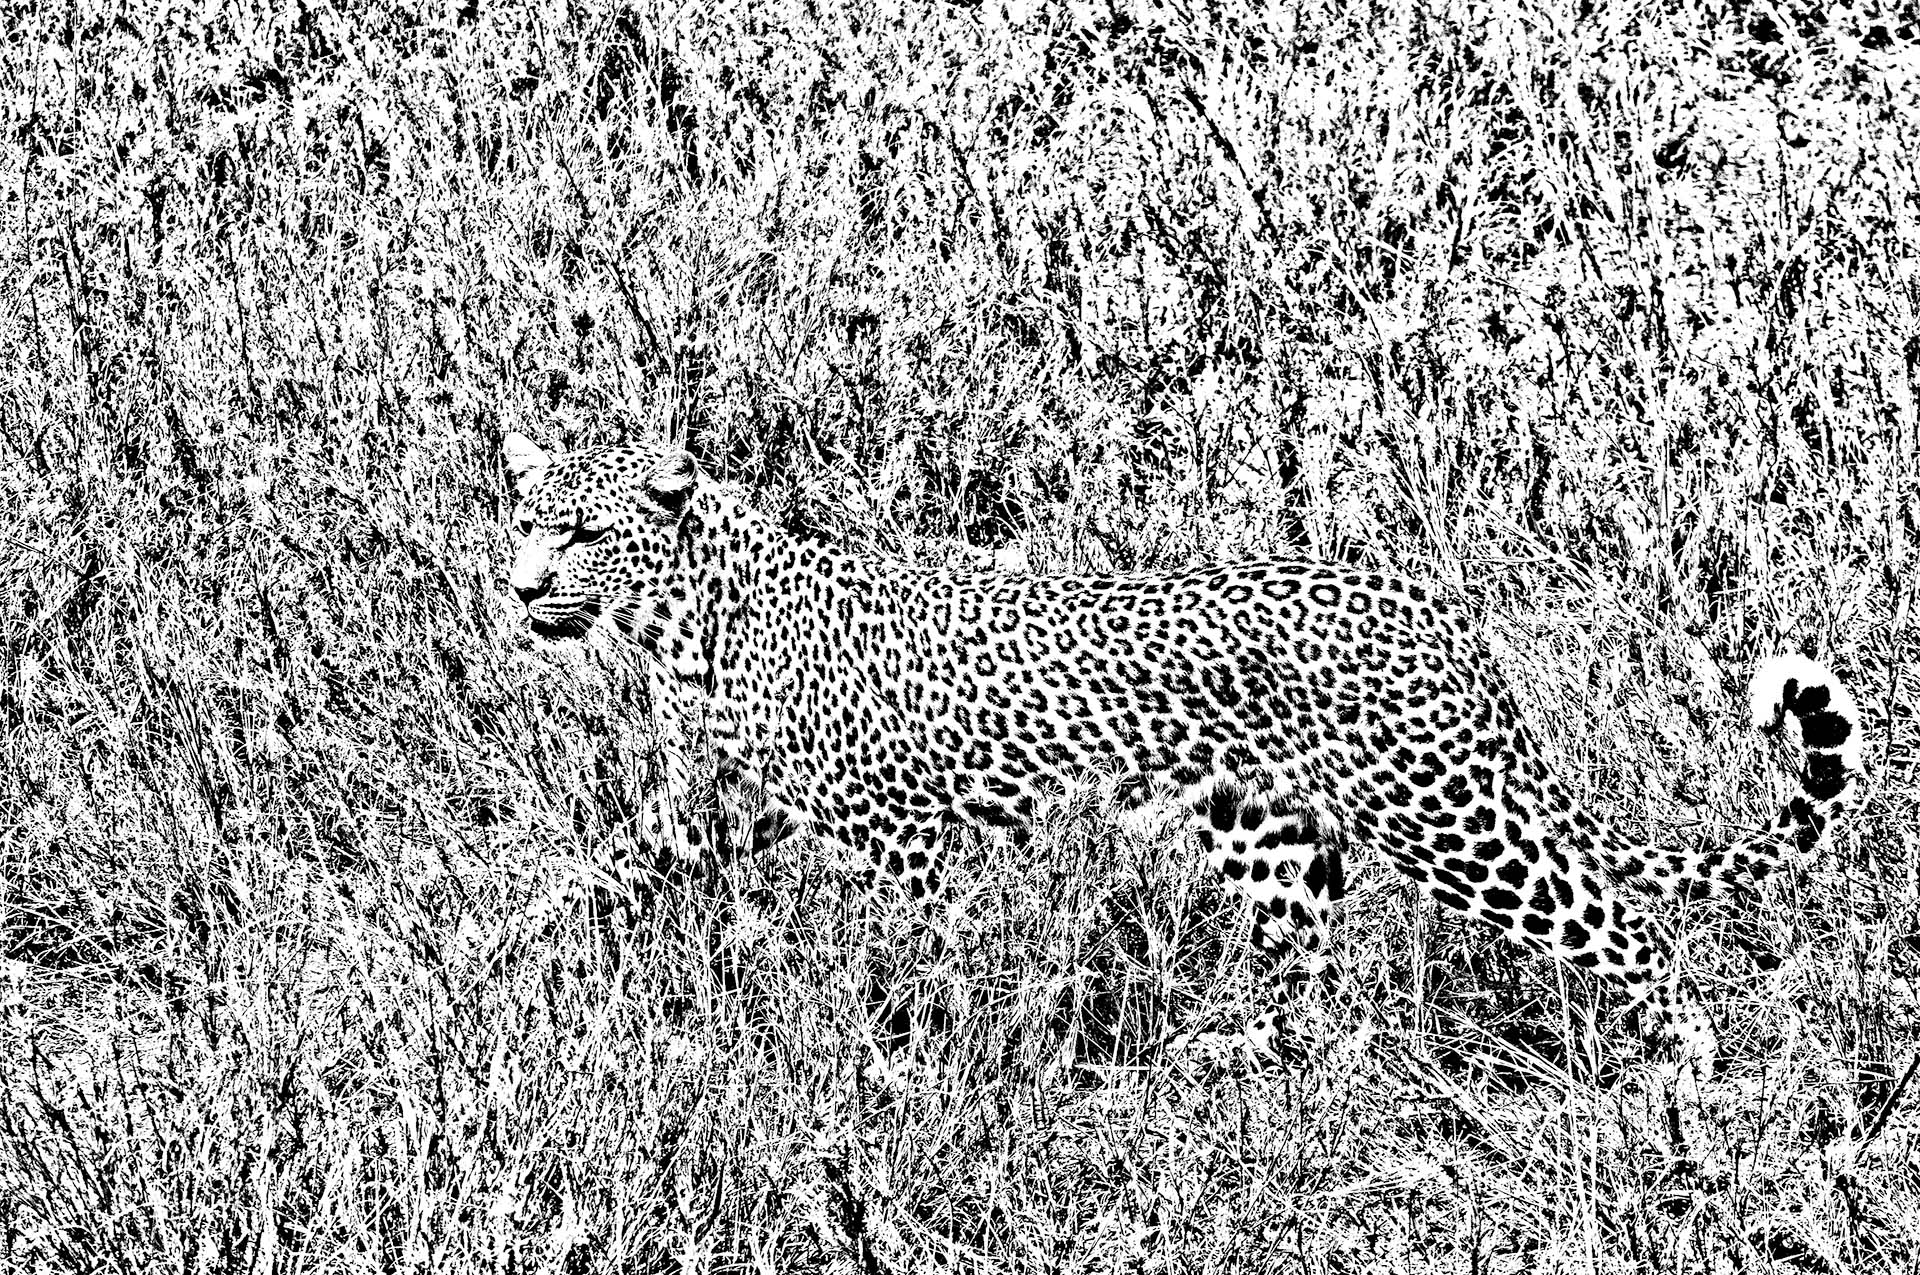 Leopard in black and white.